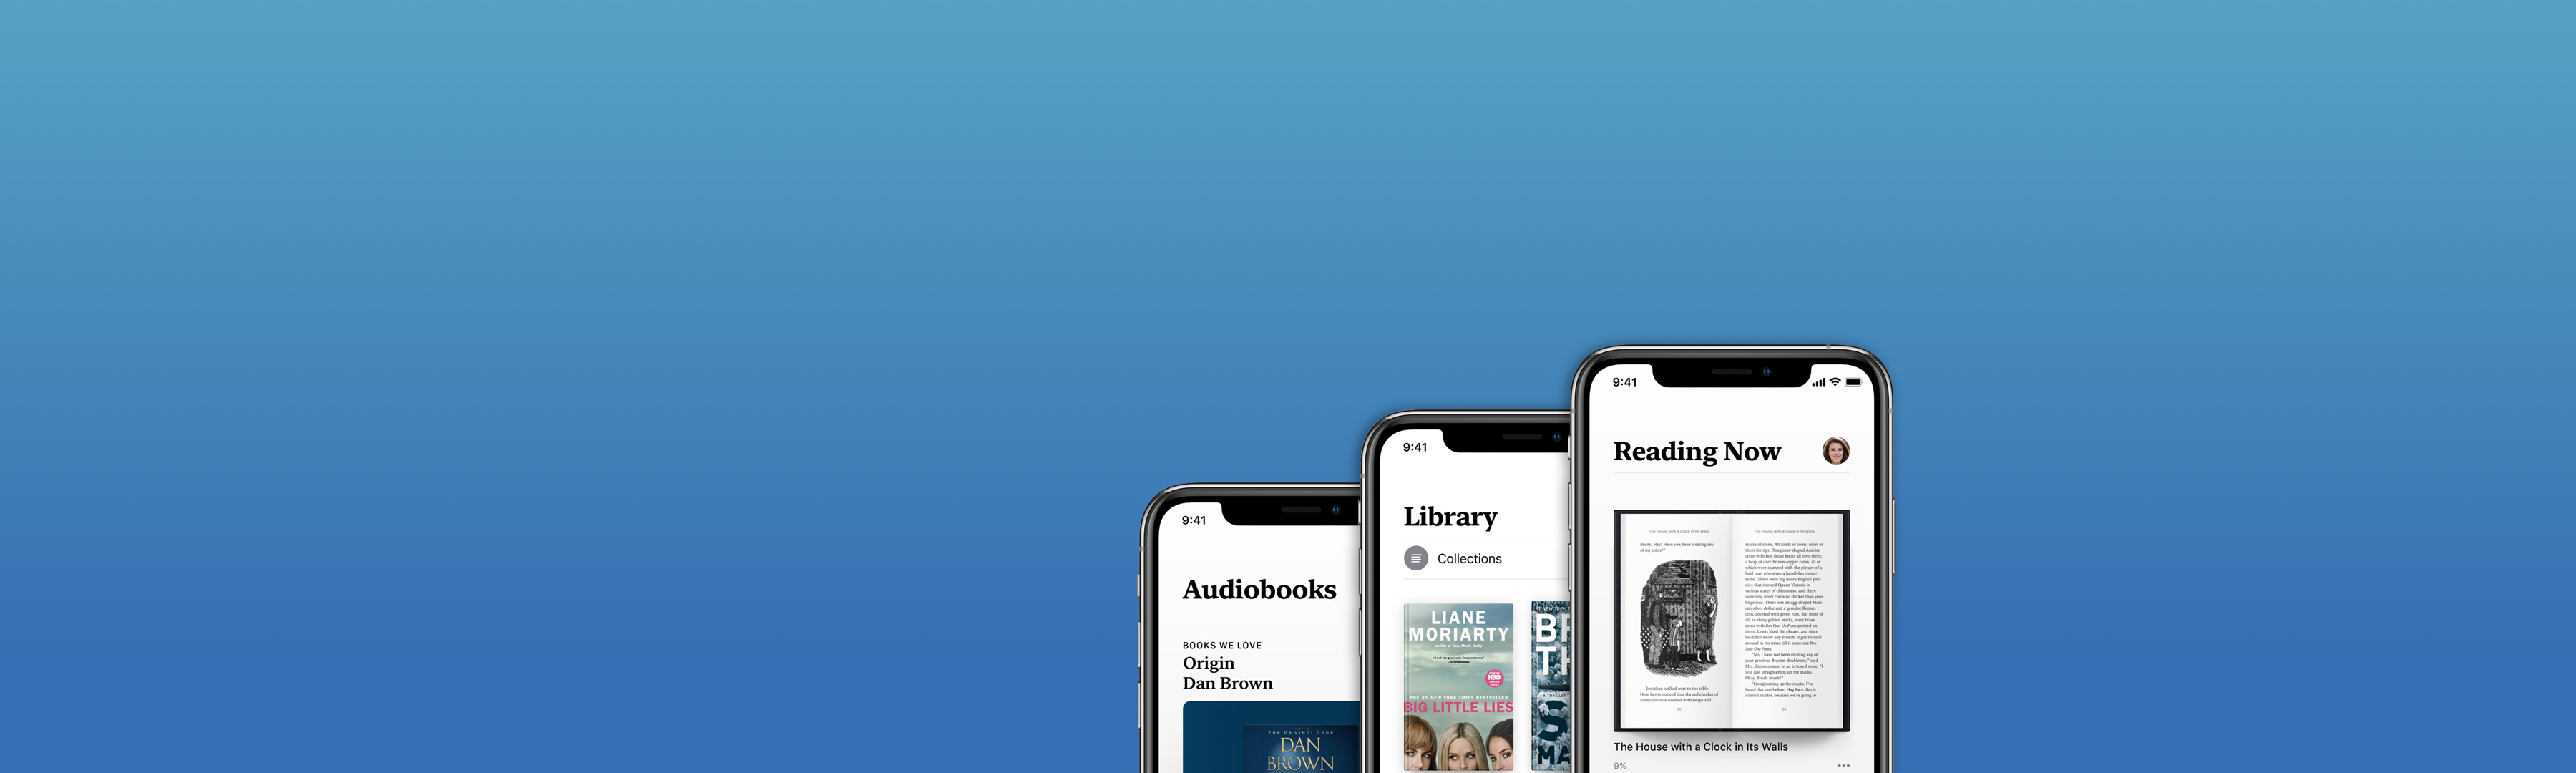 36 Top Images Audiobooks Apple / Apple Books On Ios 12 How To Use The Bookstore